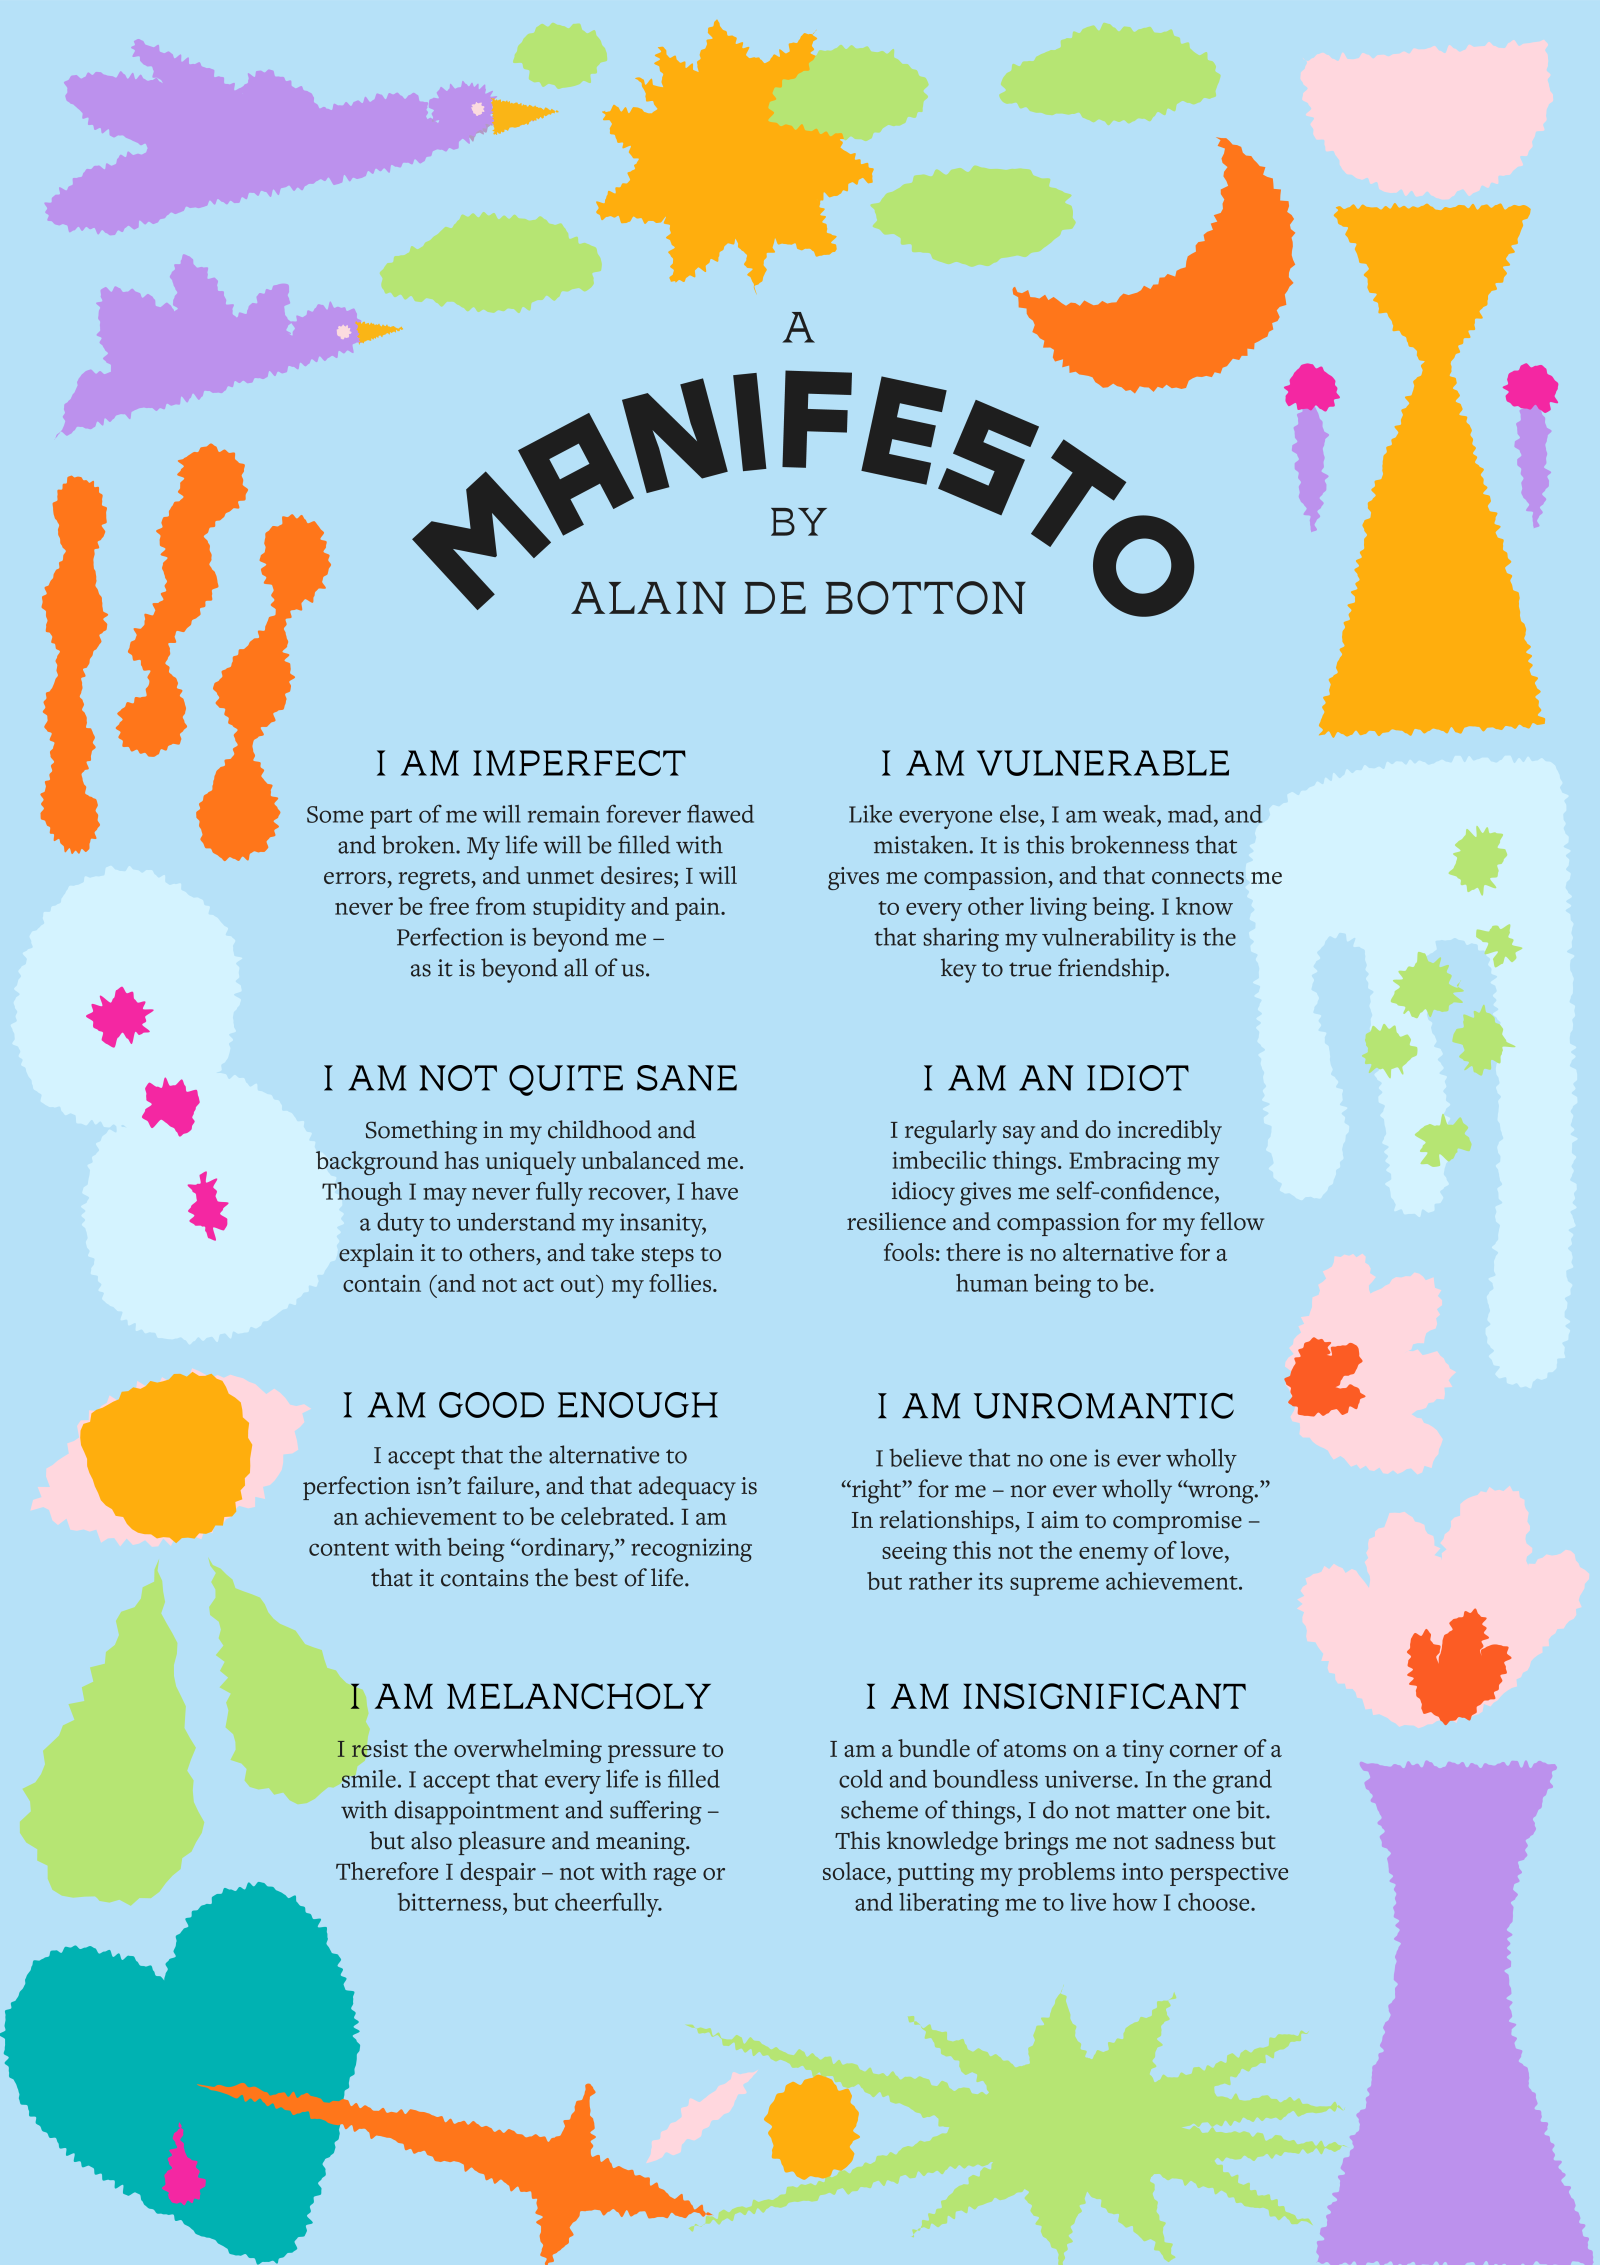 Manifesto is a series on WePresent https://wepresent.wetransfer.com which invites activists and creatives with something to say to write 10 rules to live by, in order to help spread their message. Artwork: Shivani Parasnis.